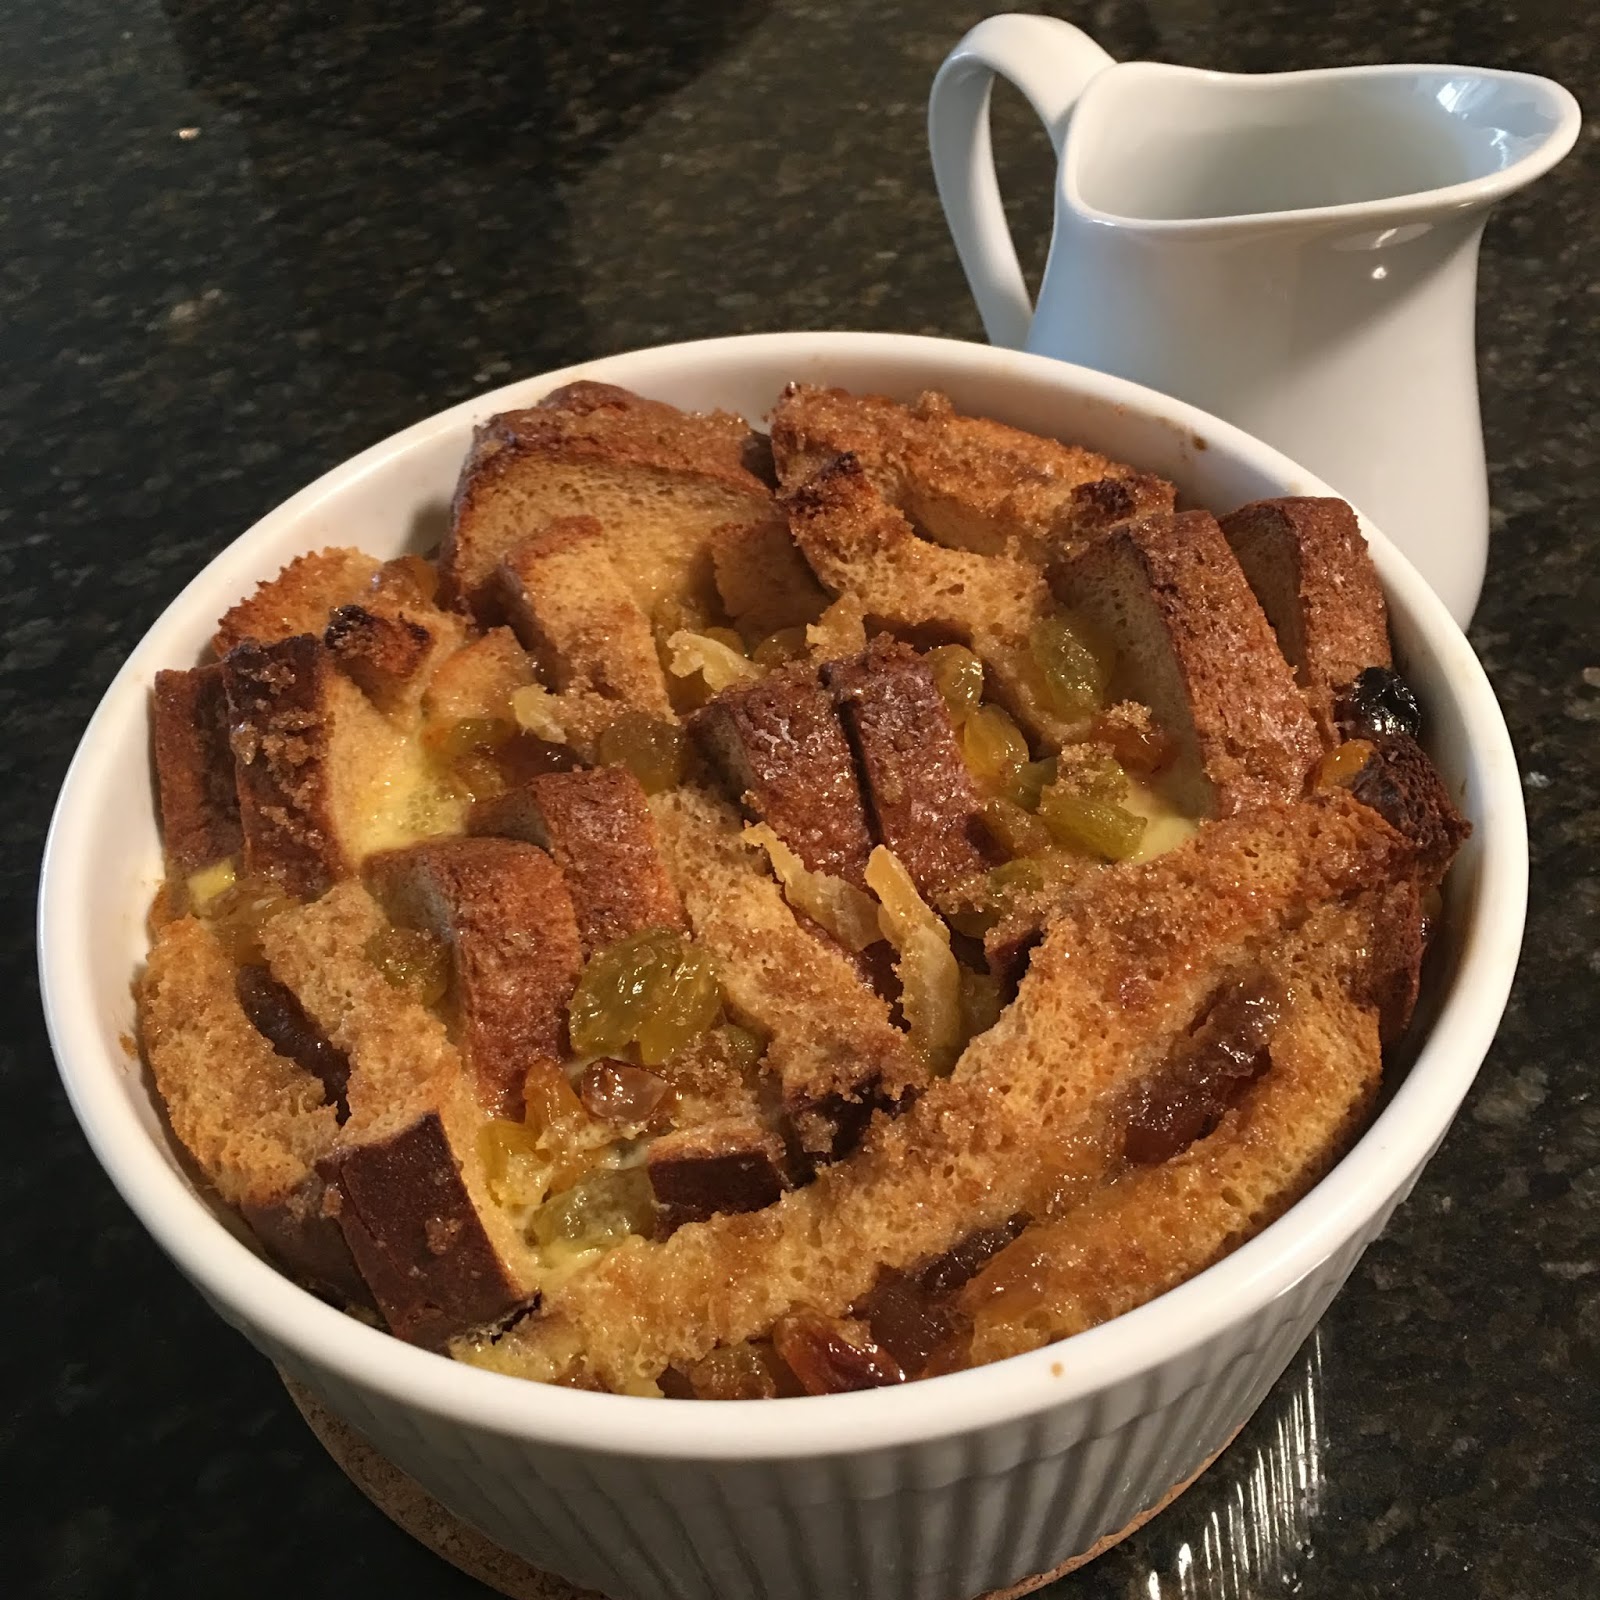 Ginger-Jam Bread and Butter Pudding